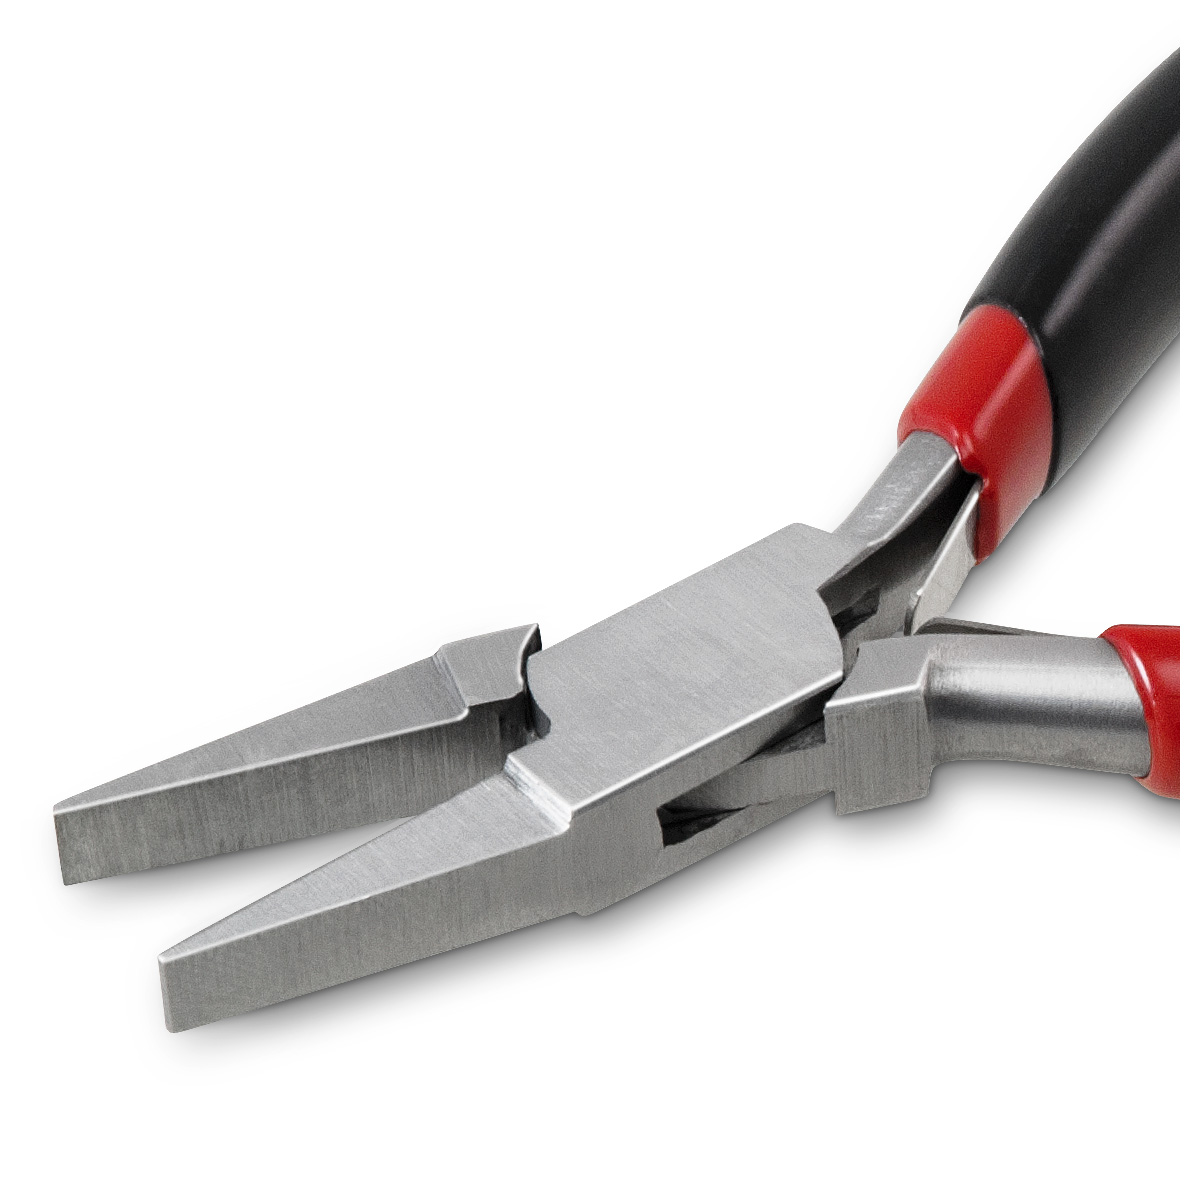 Flat nose pliers with smooth jaws